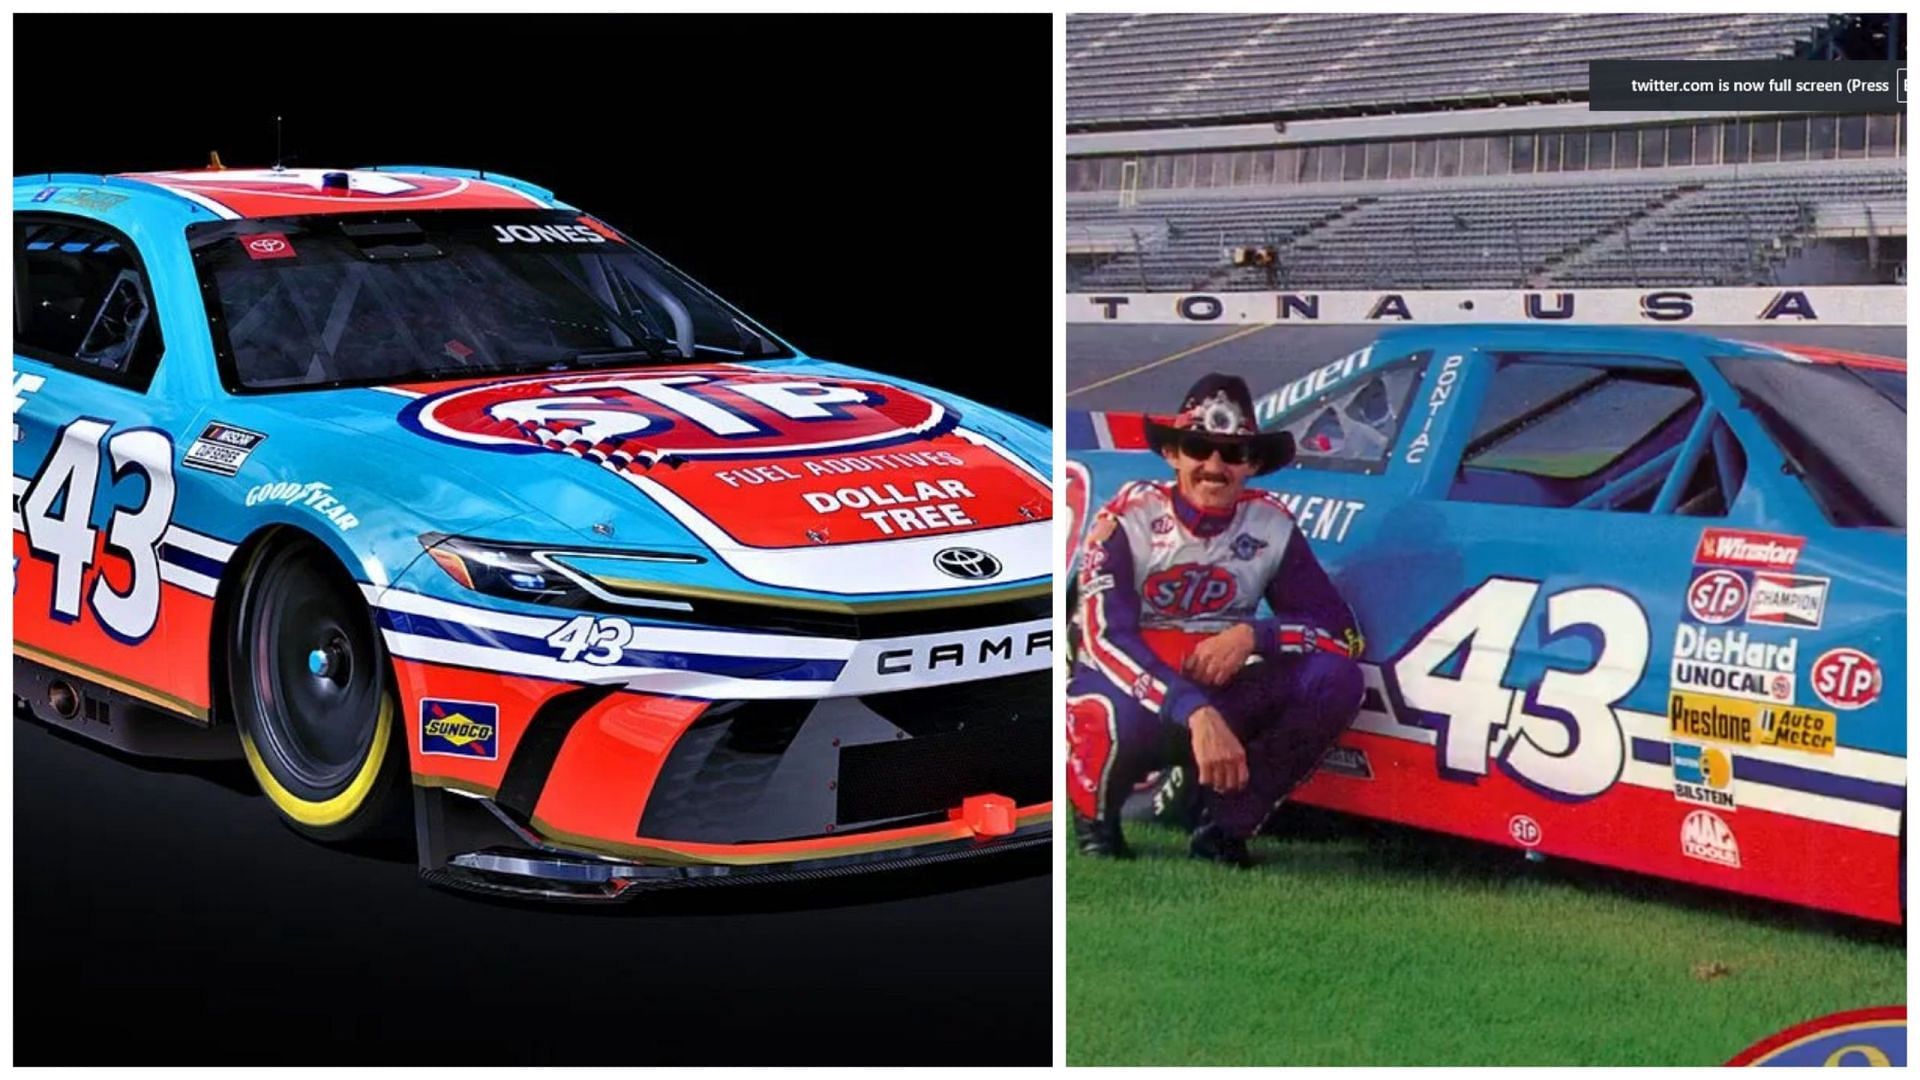 Legacy Motor Club to run special #43 livery dedicated to Richard Petty this Sunday